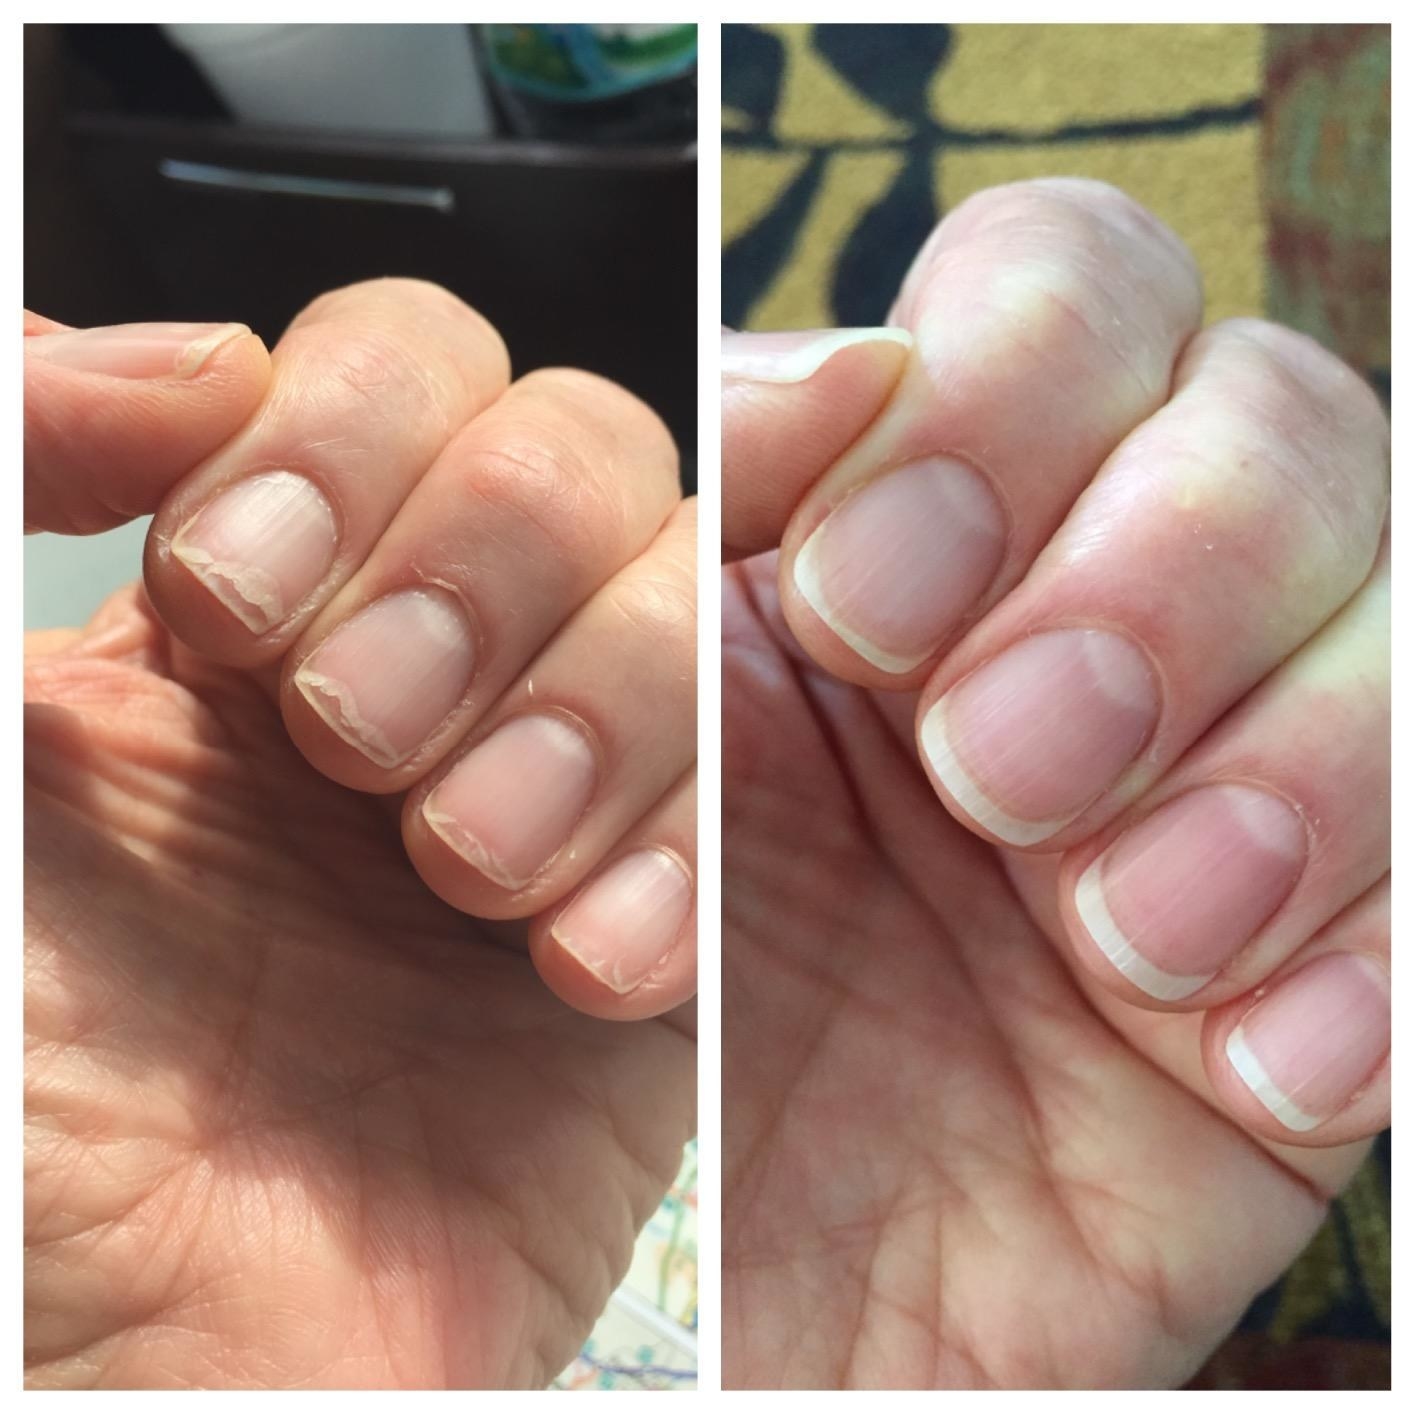 Before and after of reviewer who used the oil, showing that it helped reduce nail breakage